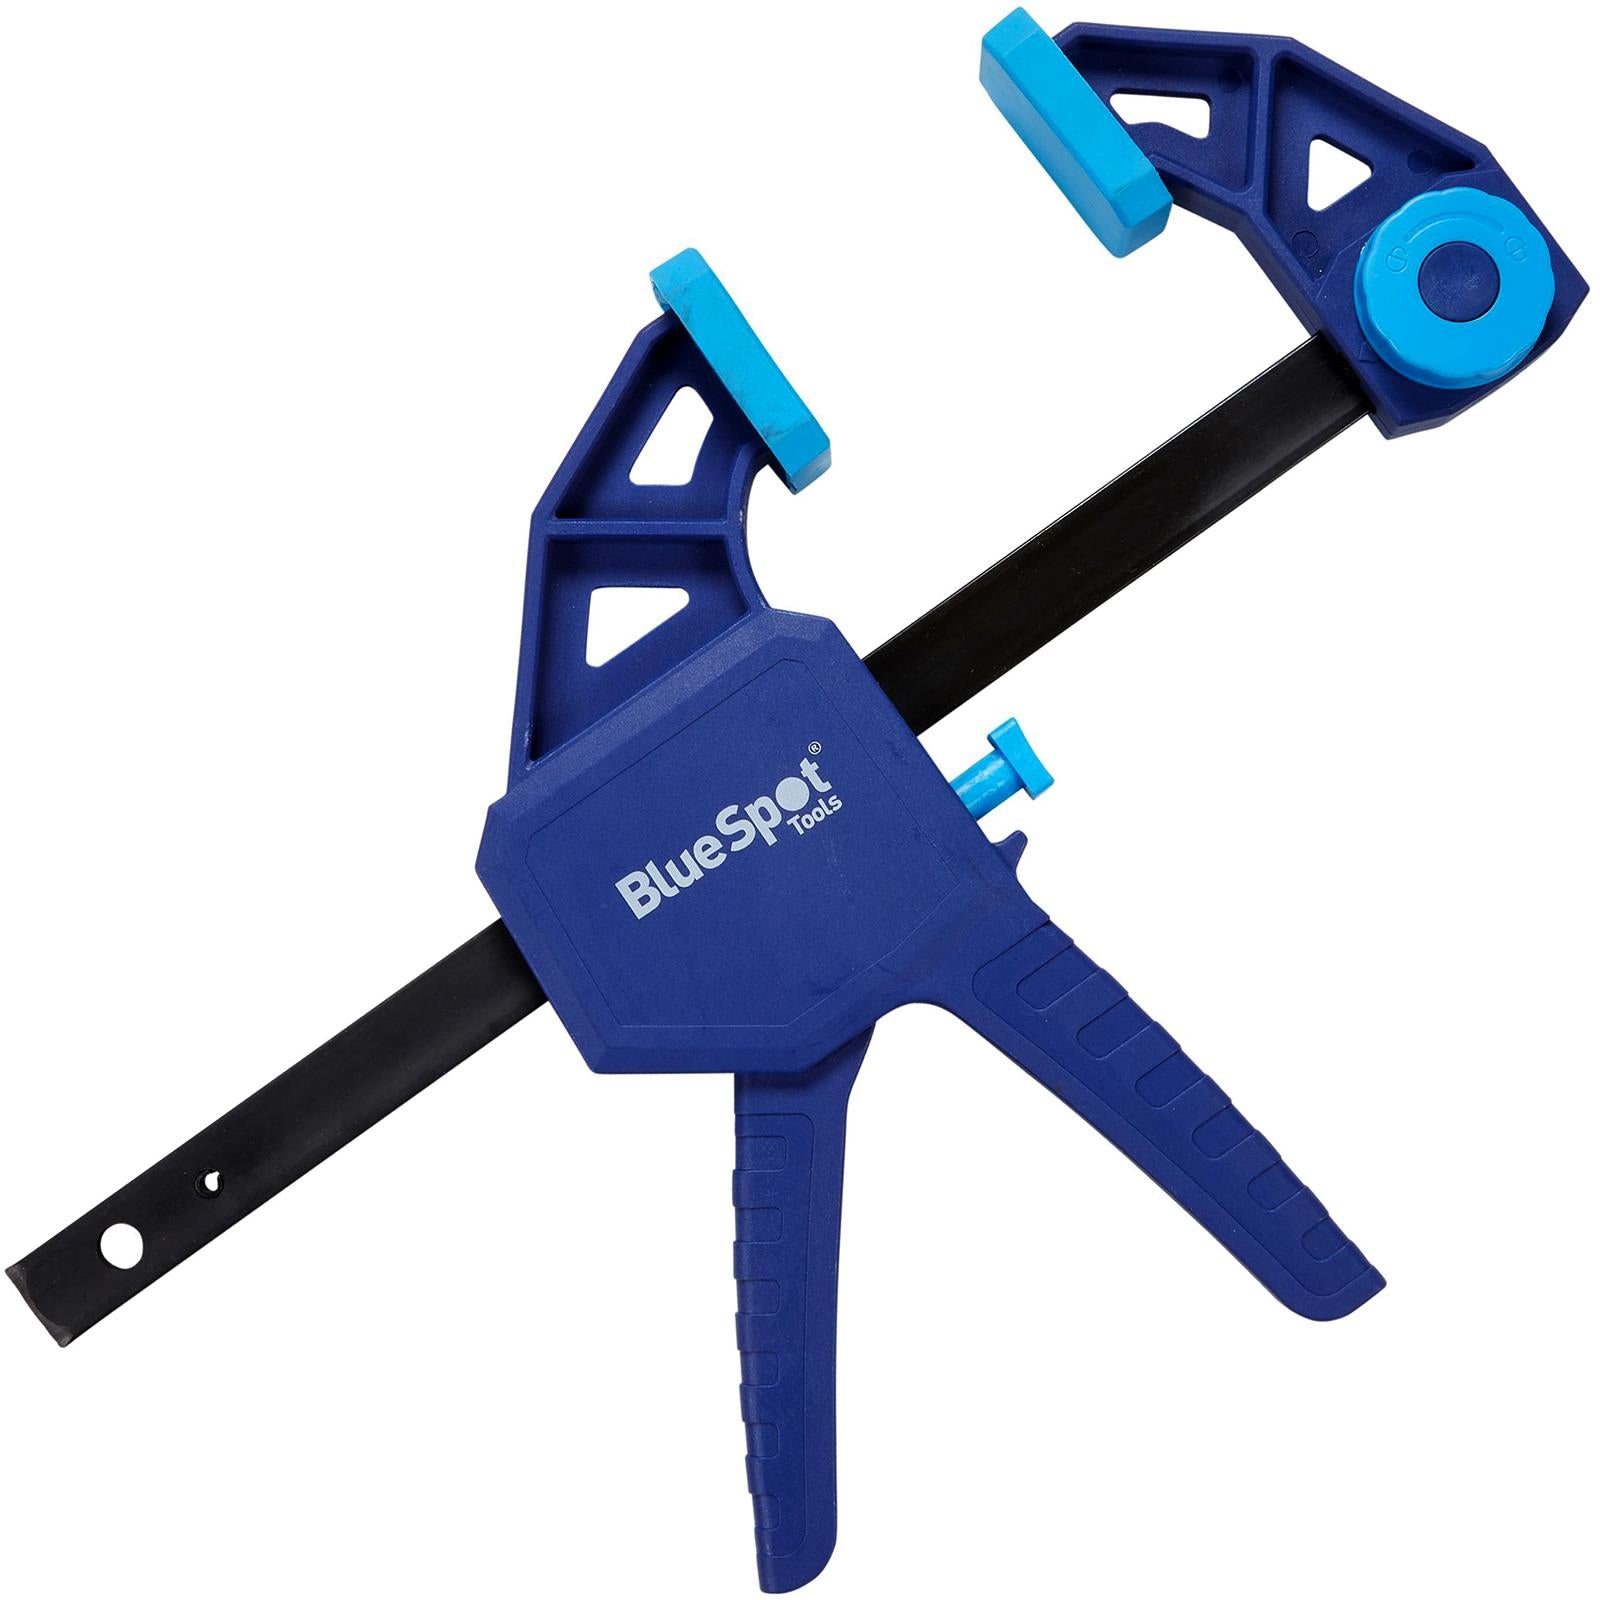 BlueSpot Heavy Duty Ratchet Speed Clamp and Spreader 150mm (6")